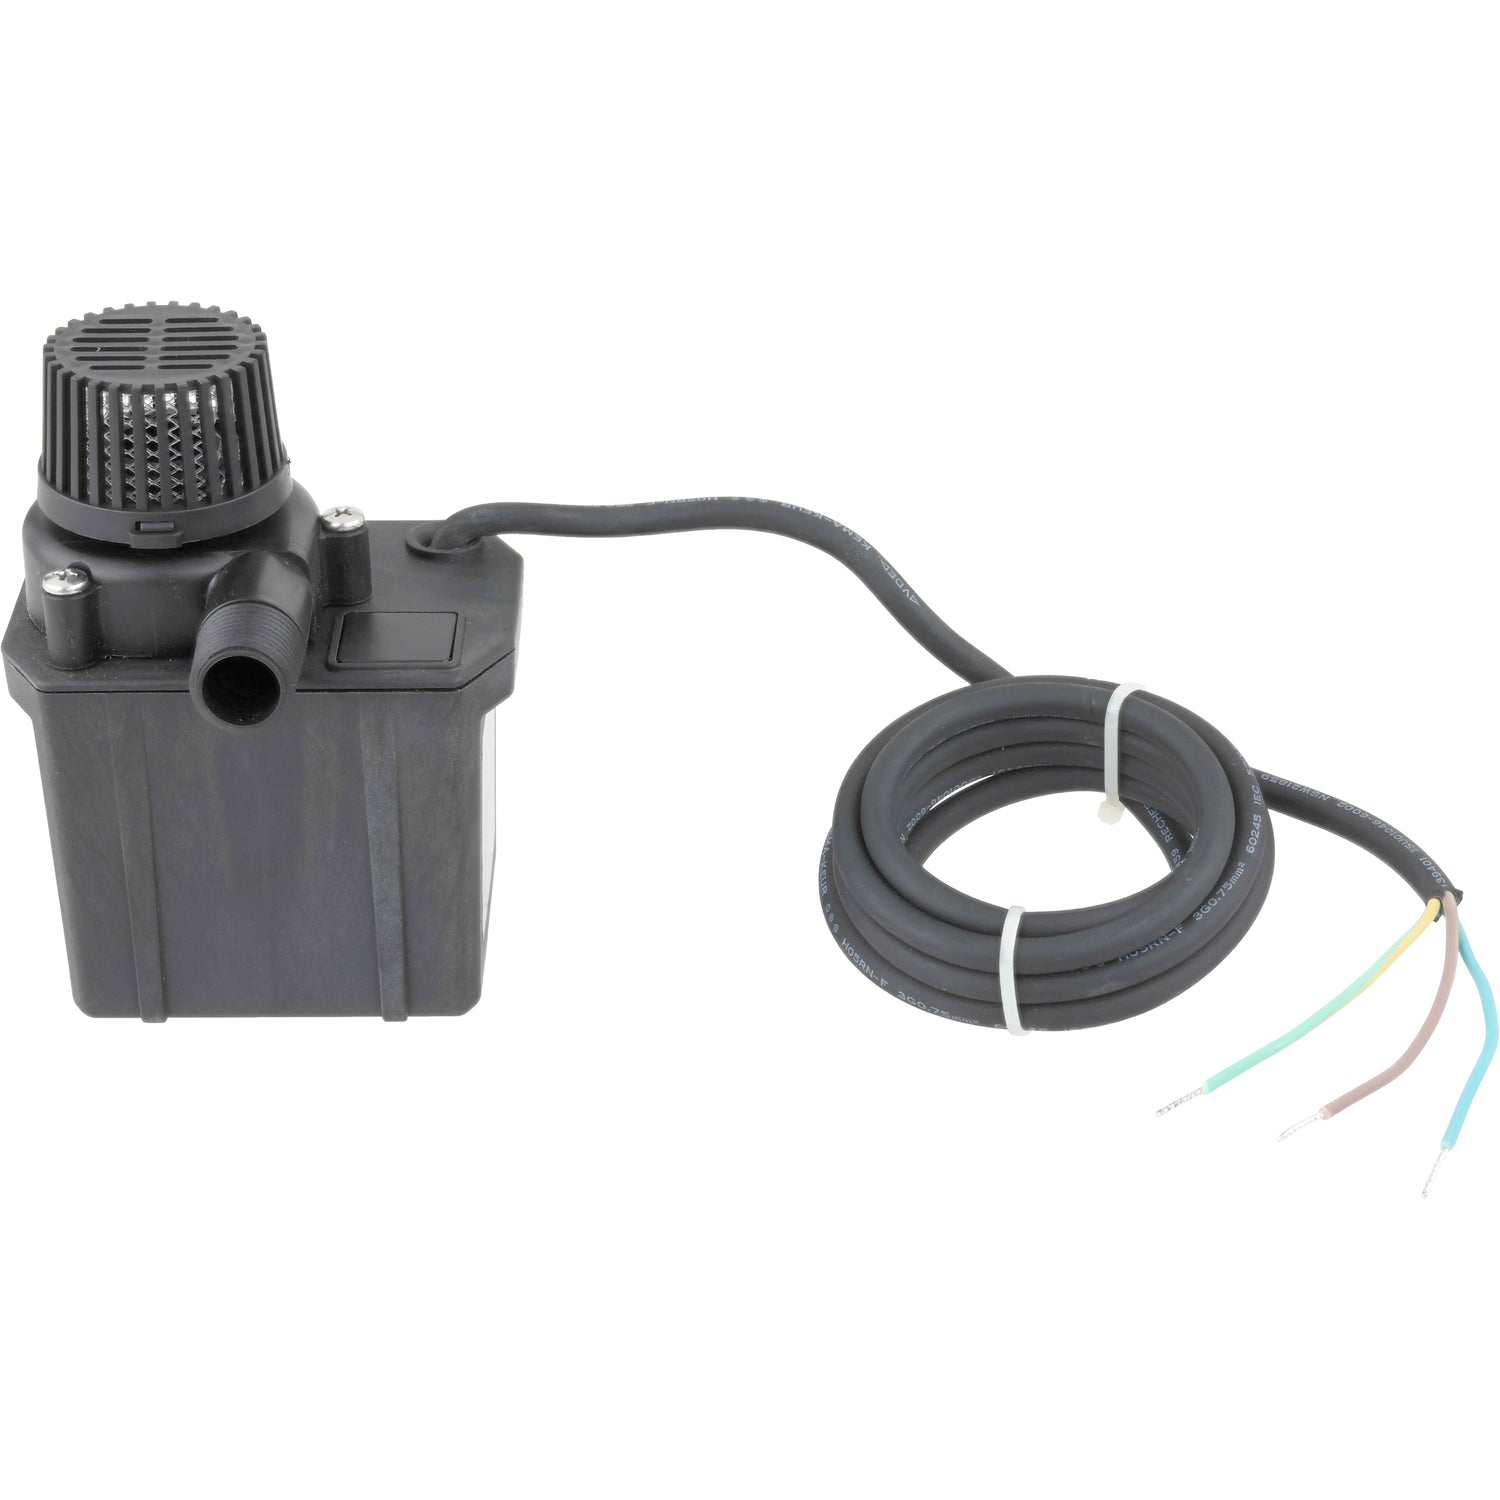 Black plastic submersible pump with coiled power cord on white background. G535C